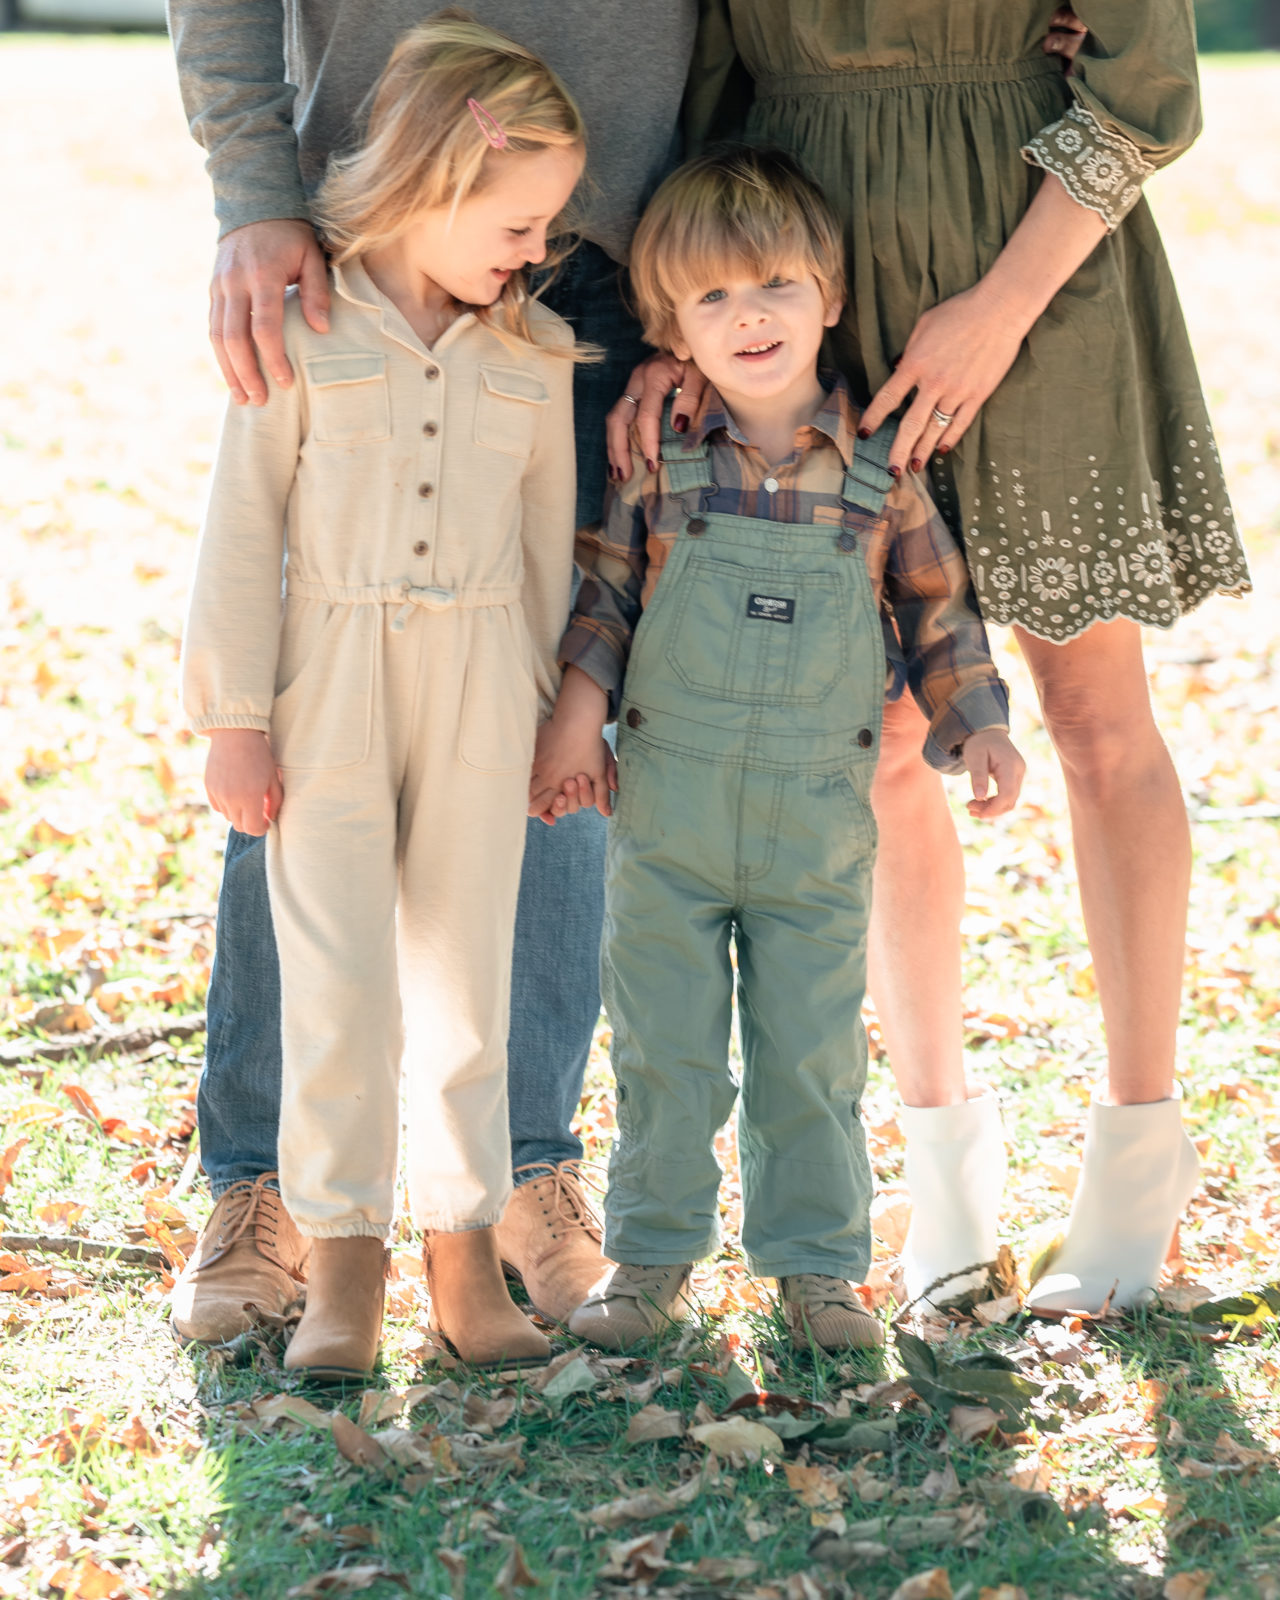 Mom and dad's hands rest on son and daughters shoulders during annual family portrait session. Sister gazes down at her brother, who is holding her hand while he gazes directly at the camera.